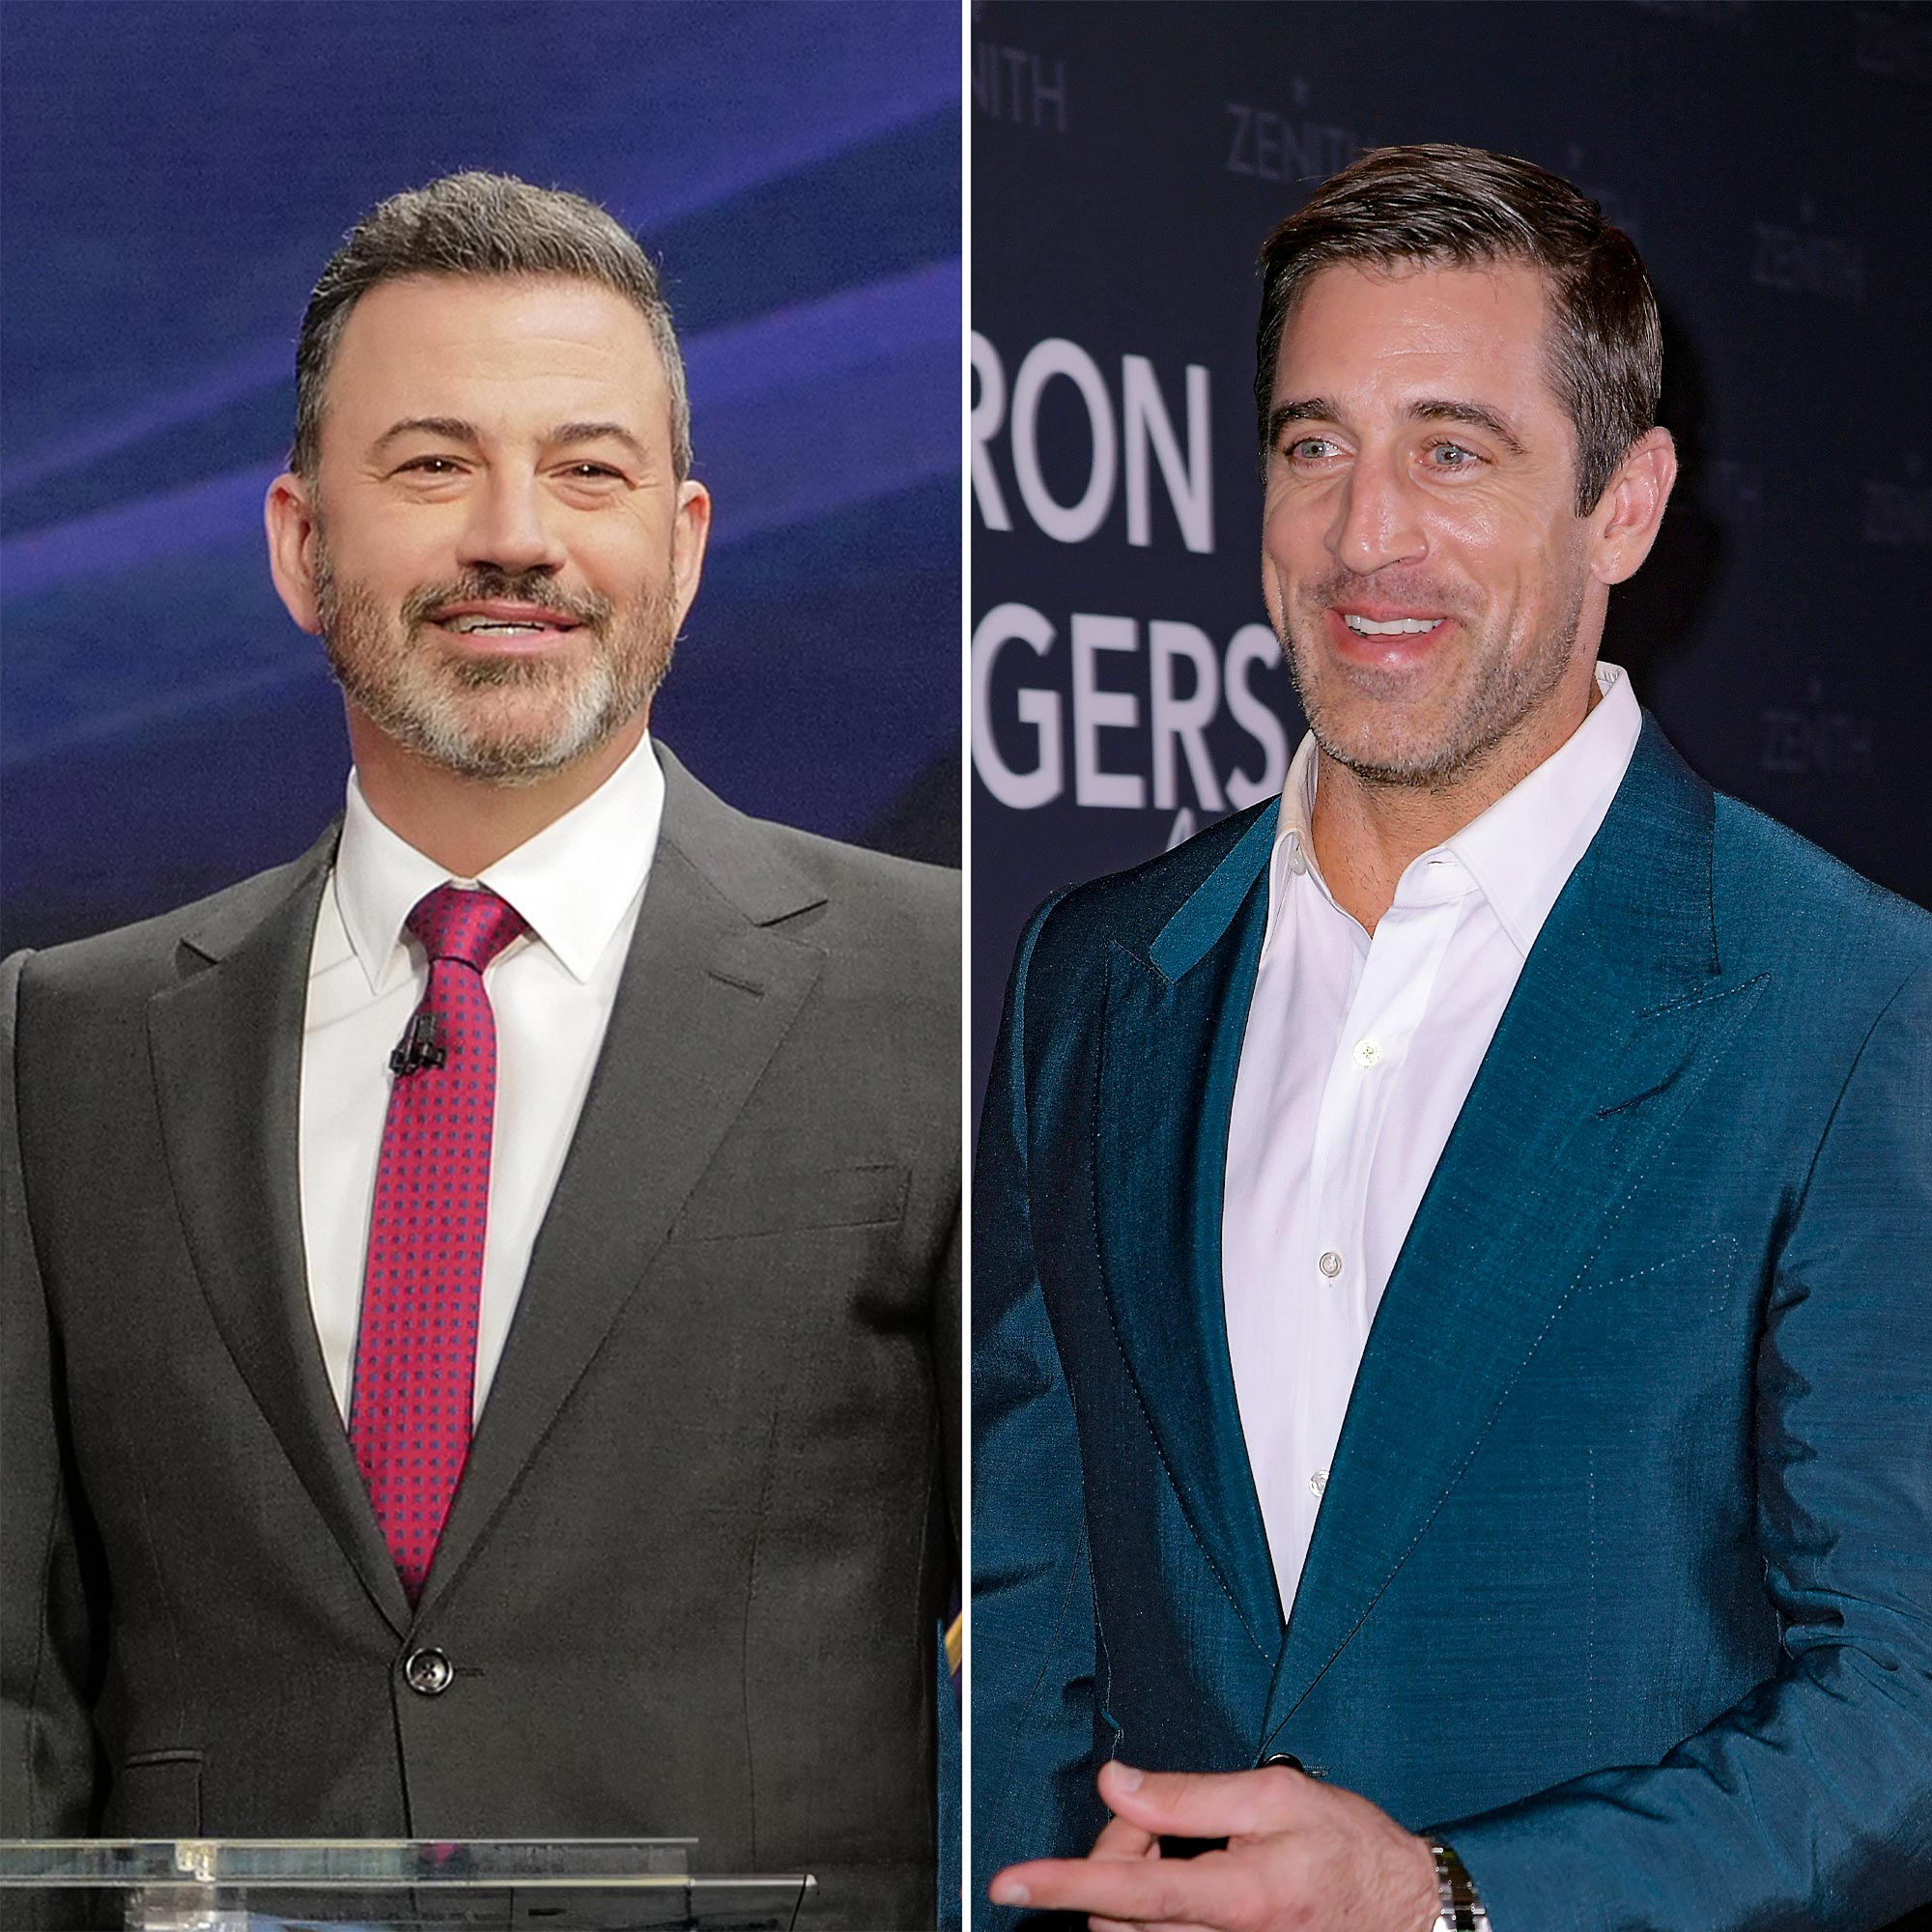 Jimmy Kimmel and Aaron Rodgers’ Feud Timeline Late Night Jokes Epstein List Claims and More 939